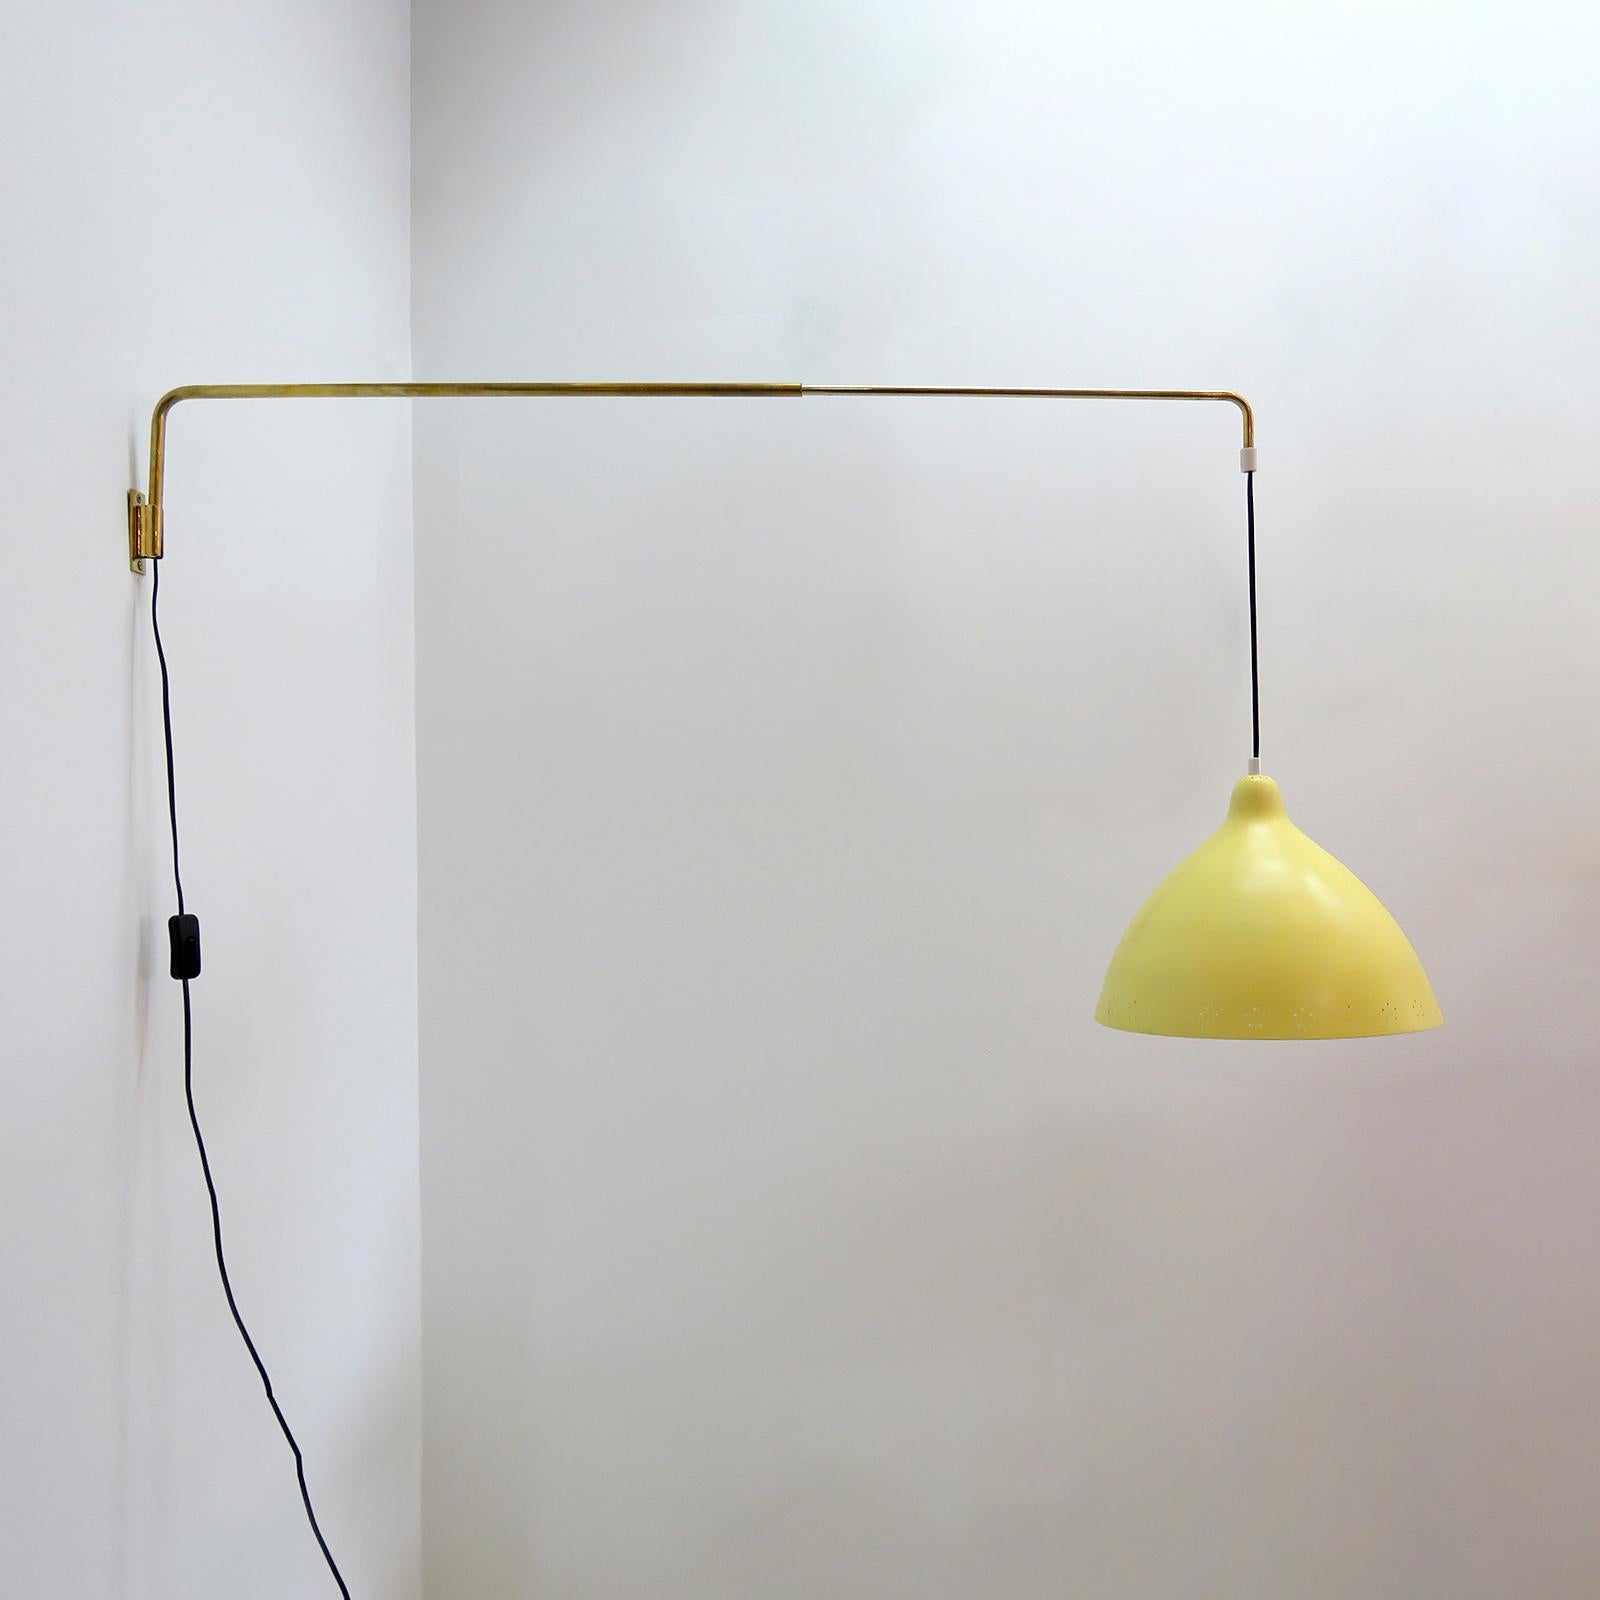 Finnish Swing Arm Wall Lights by Lisa Johansson-Pape for Orno, 1960 For Sale